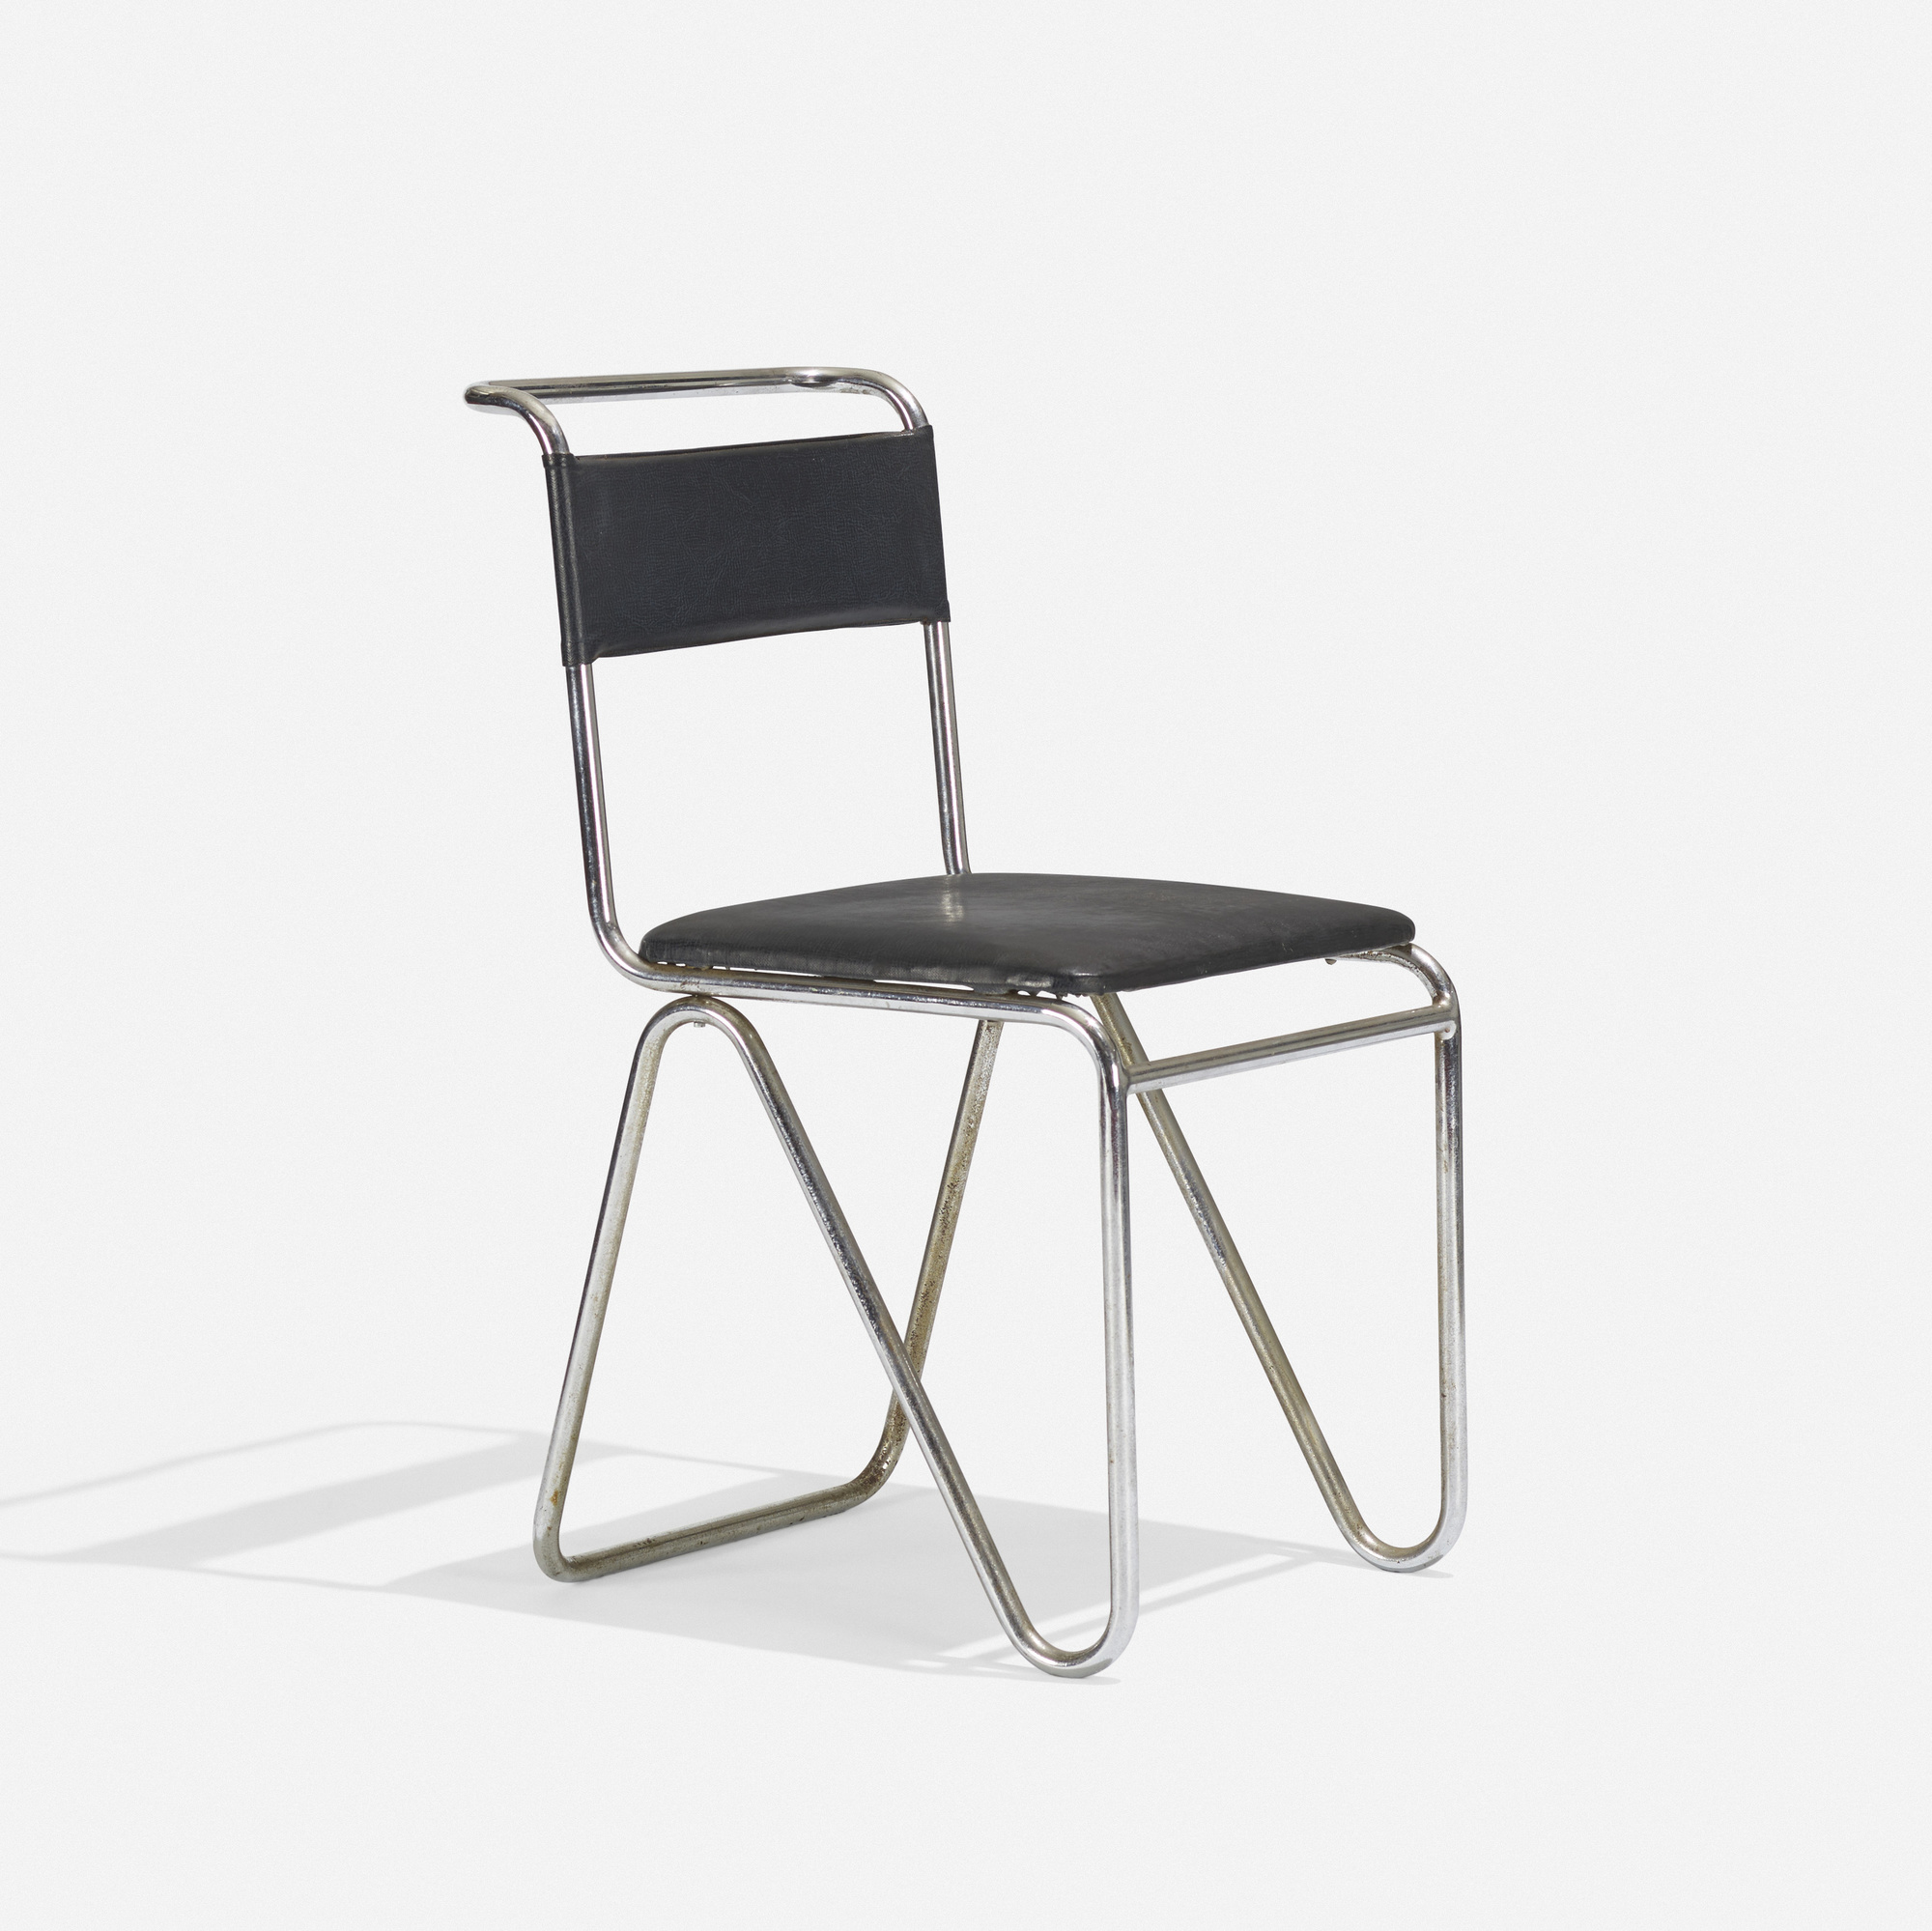 113: WILLEM H. GISPEN, chair < The Boyd Collection – III. Life of Design, 8 November 2018 < Auctions | Wright: Auctions of Design